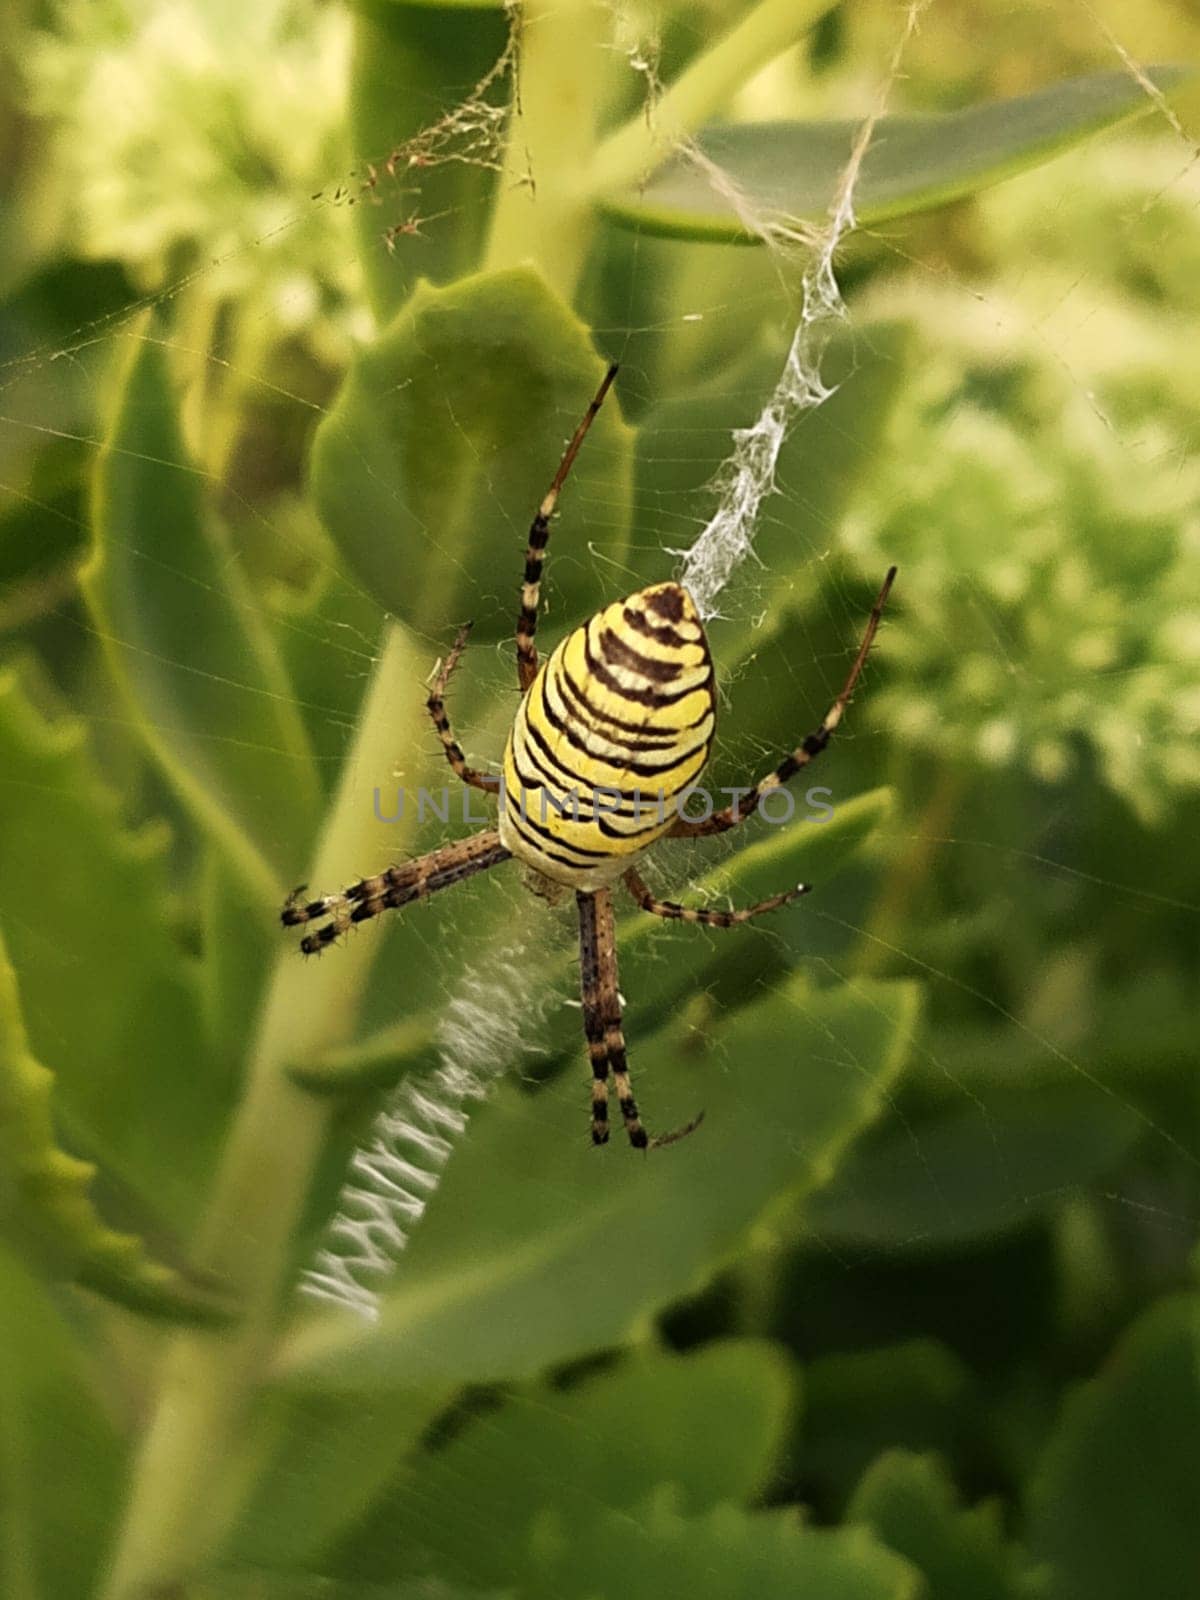 Wasp spider in the web against the background of green leaves close-up.